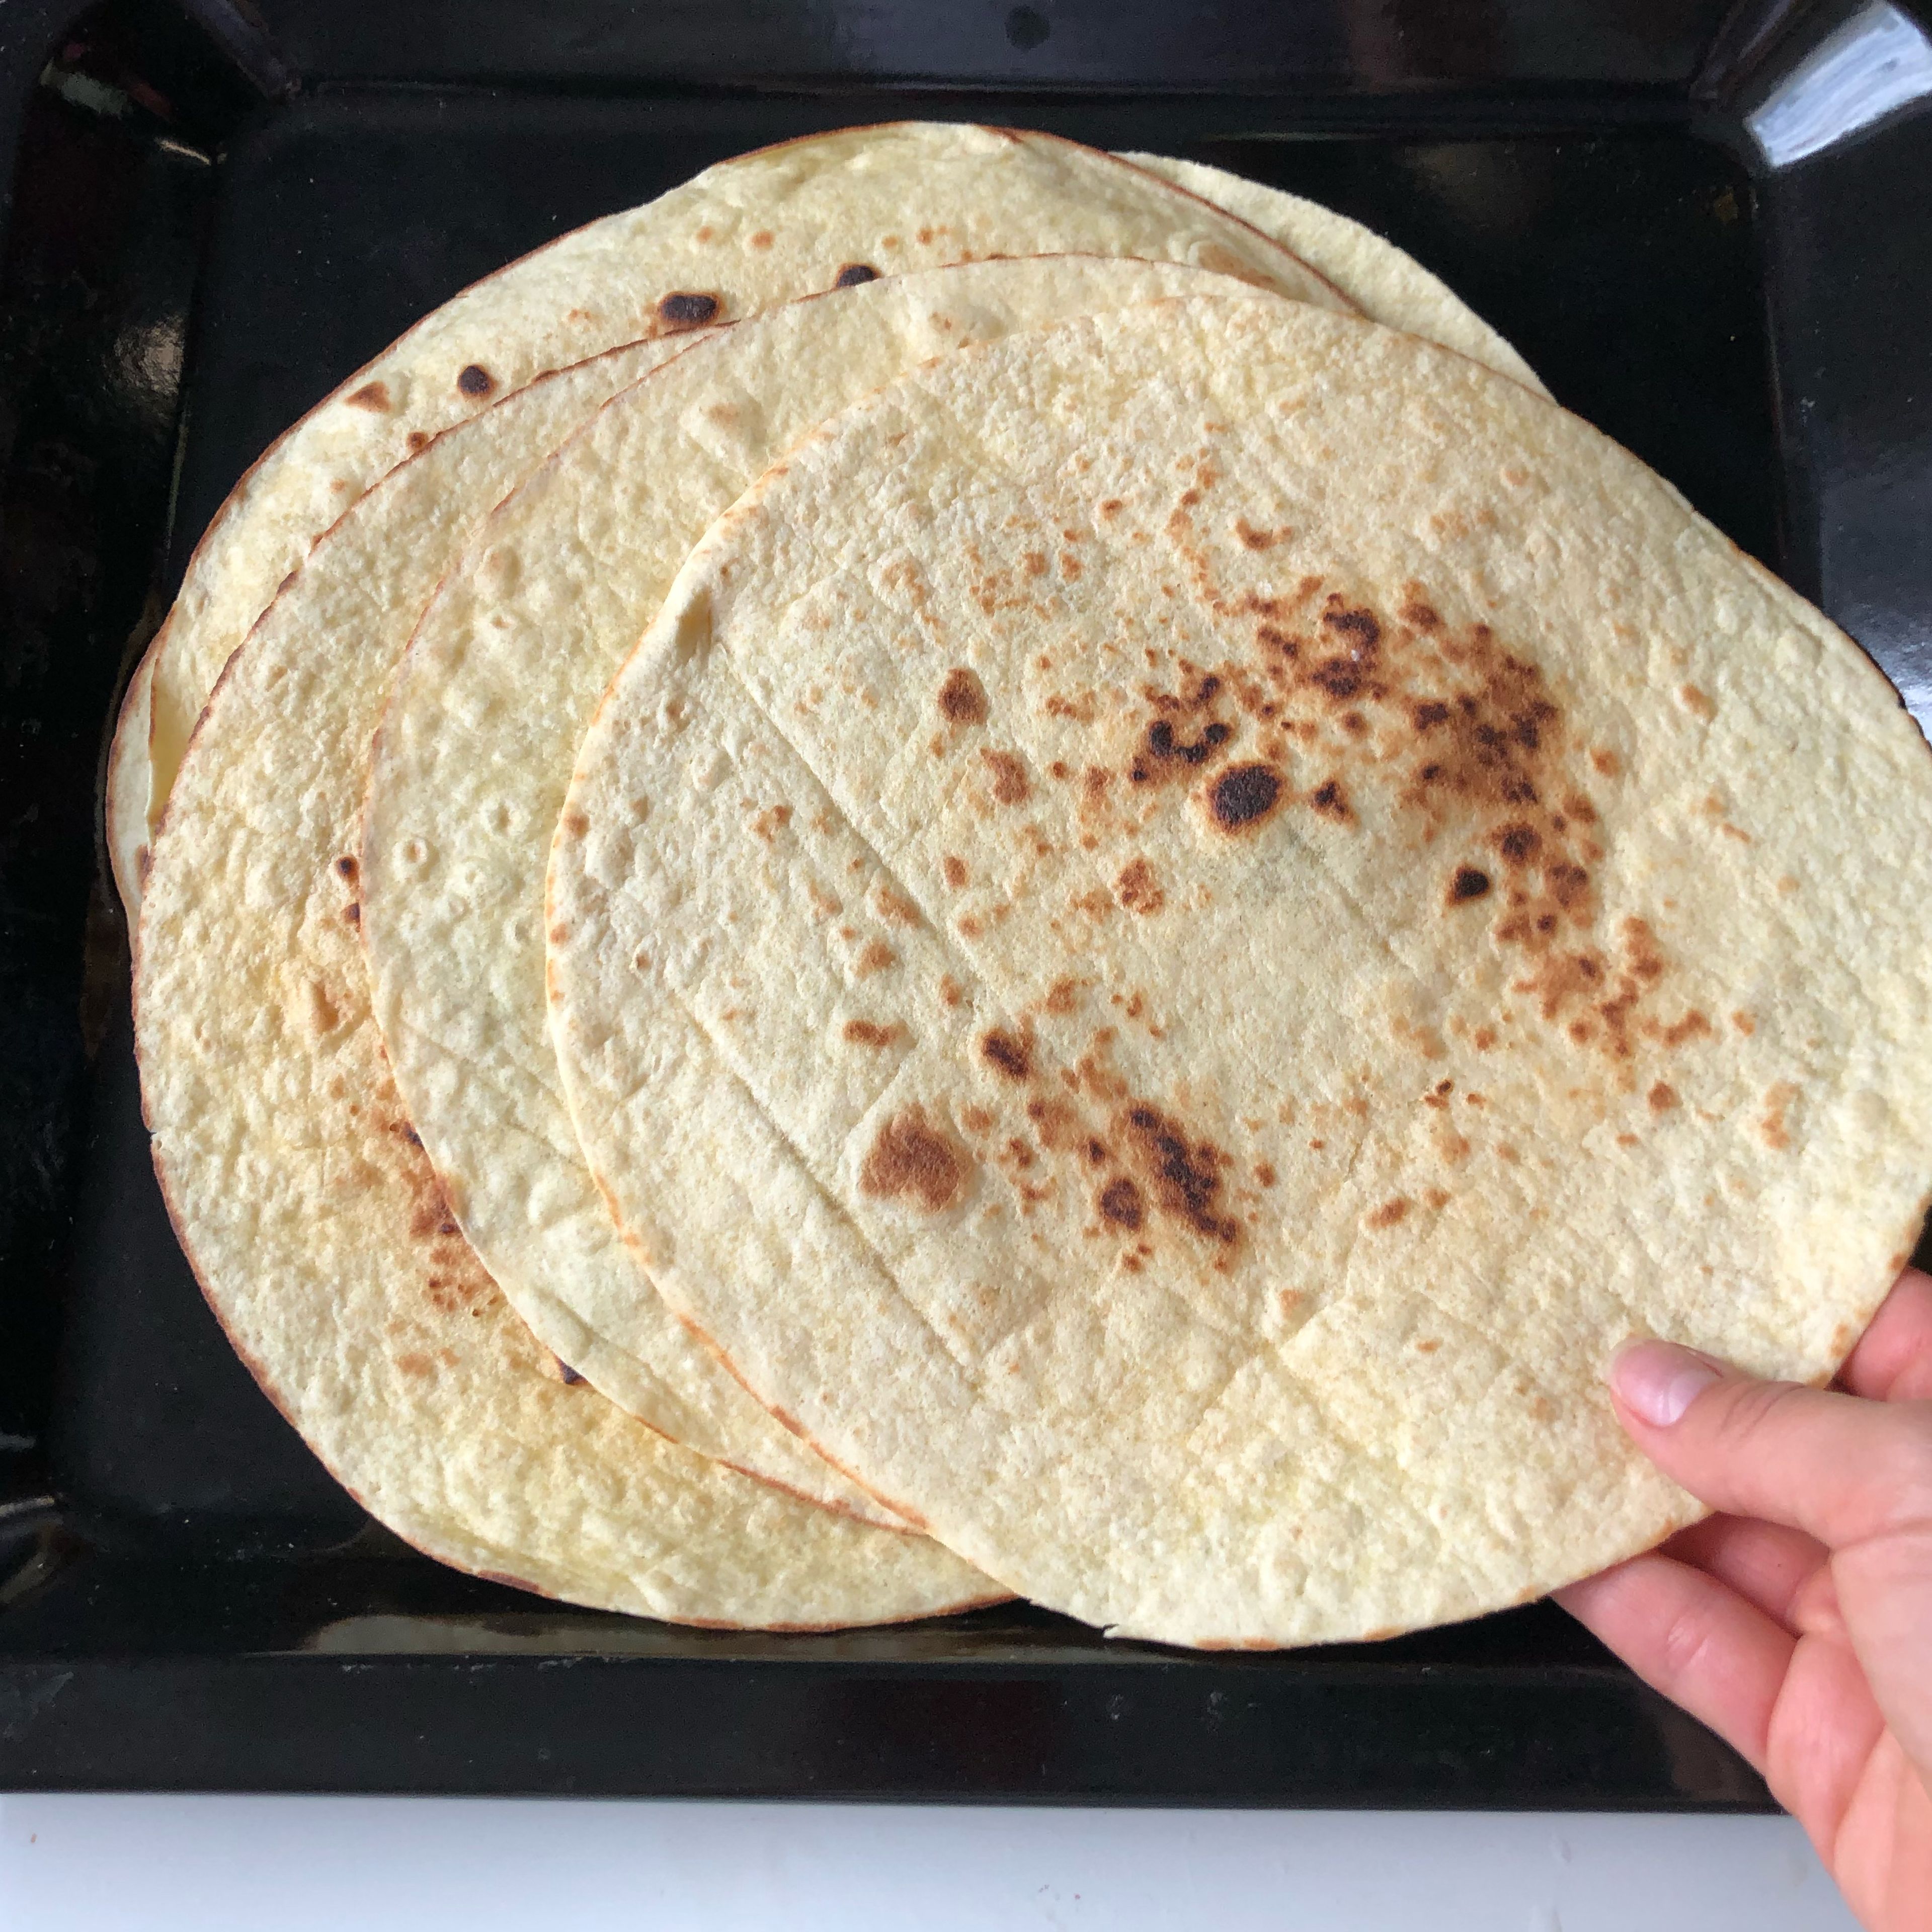 dry the tortilla in a dry pan on both sides